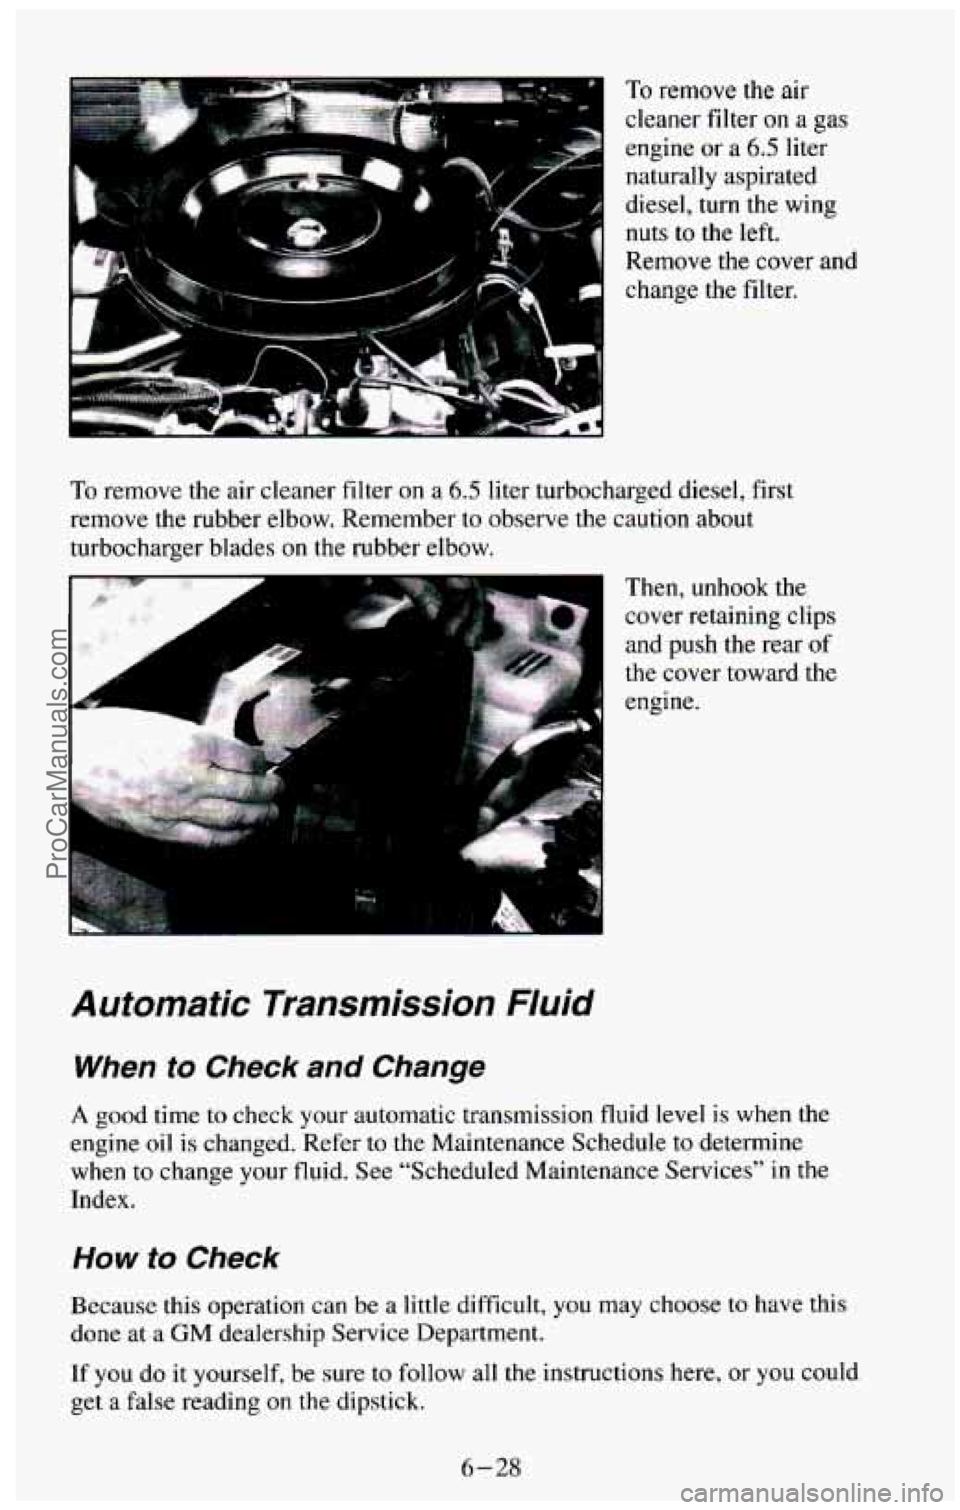 CHEVROLET SUBURBAN 1994  Owners Manual To remove the air 
cleaner filter 
on a  gas 
engine  or 
a 6.5 liter 
naturally  aspirated 
diesel,  turn  the wing 
nuts 
to the  left. 
Remove  the  cover  and 
change  the  filter. 
To remove  the